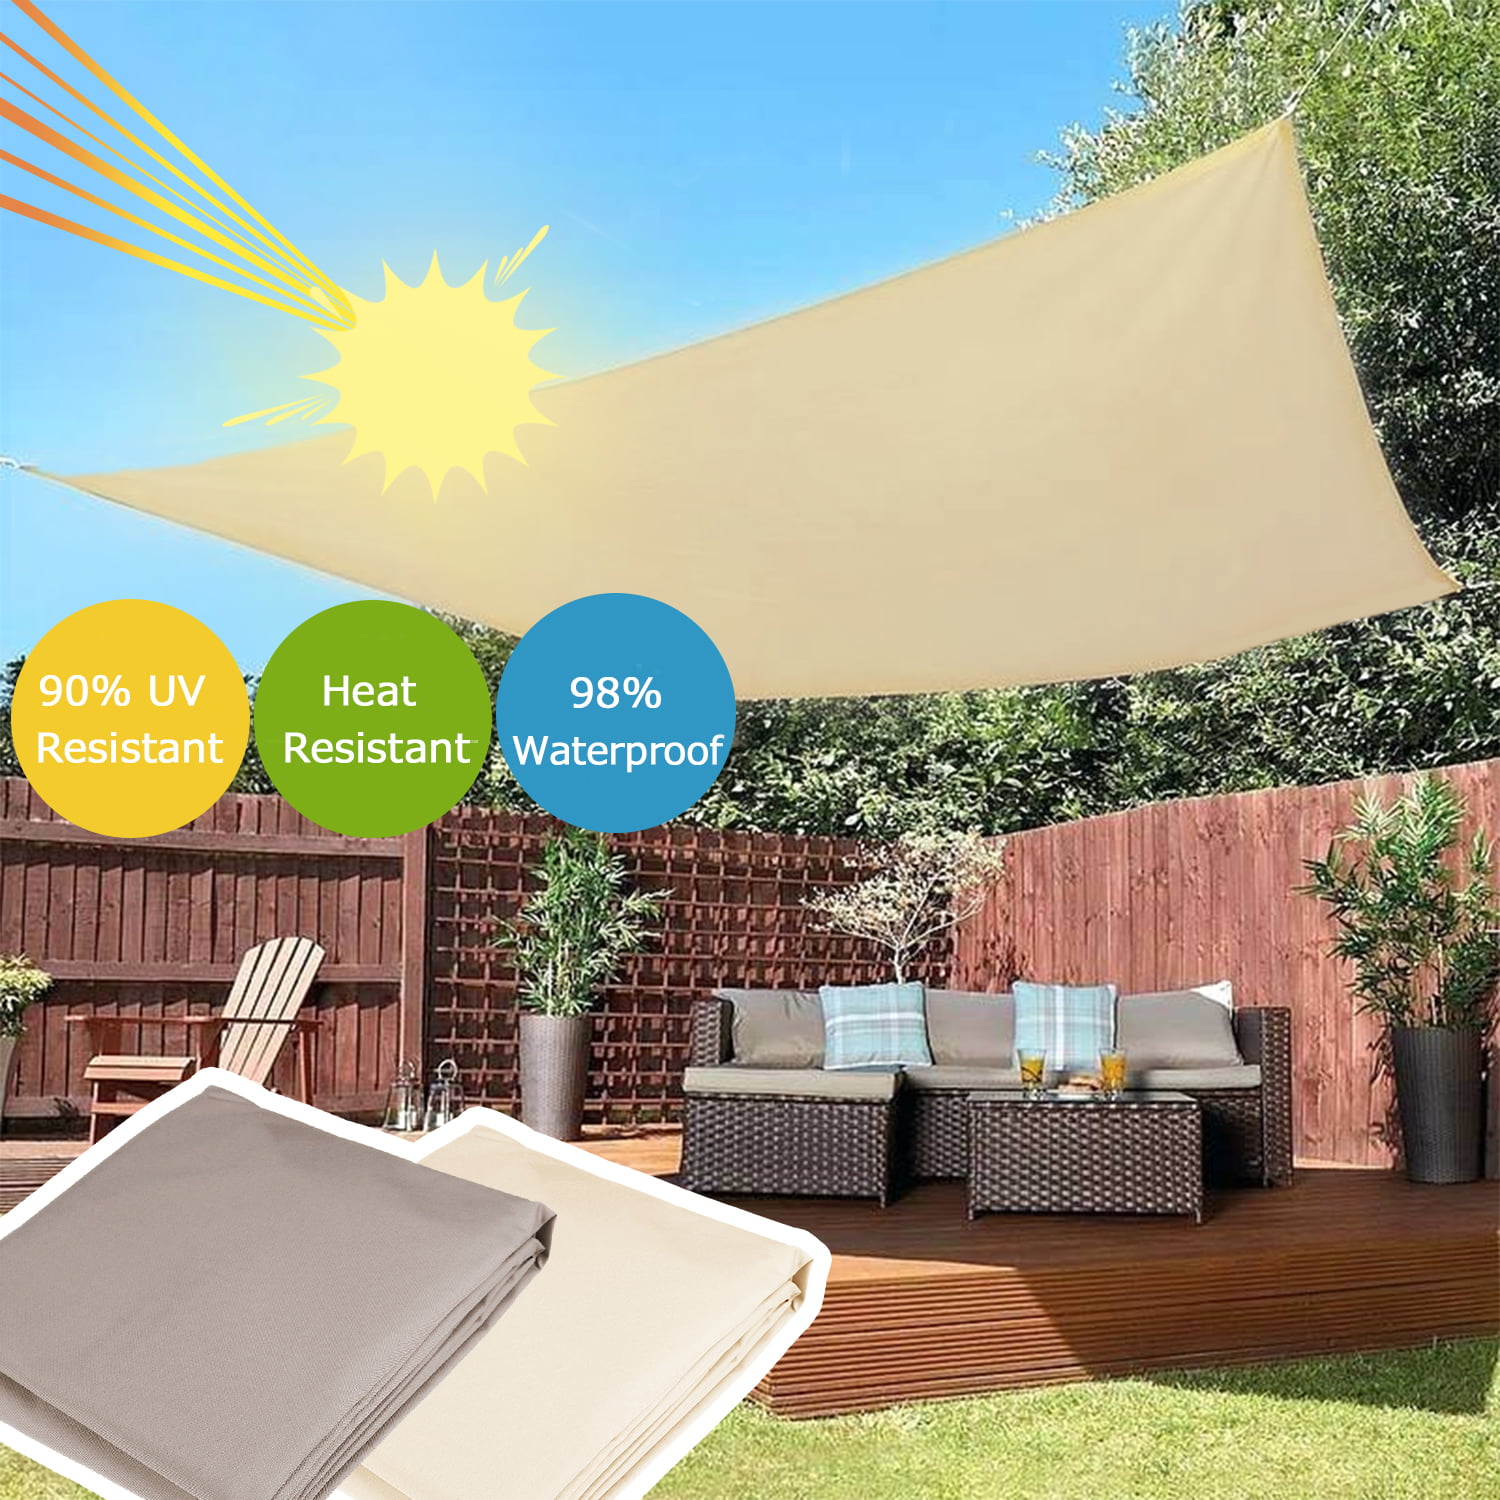 4m Sun Shade Sail Garden Patio Awning Canopy 98% UV Block Square Anthracite New 